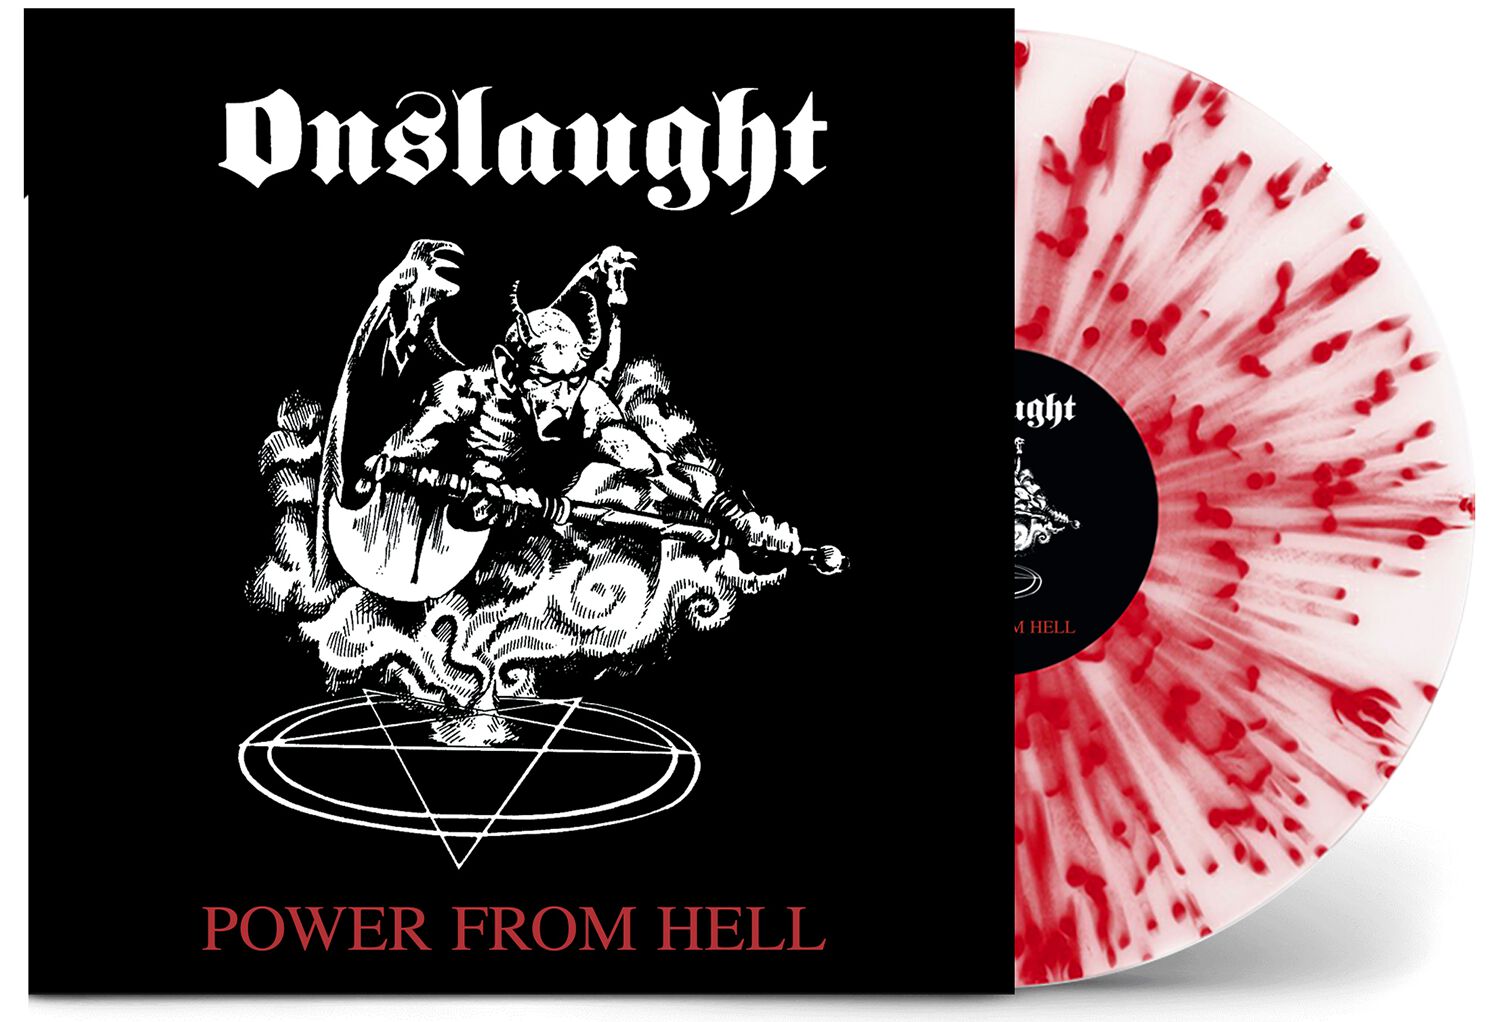 Image of Onslaught Power from hell LP splattered